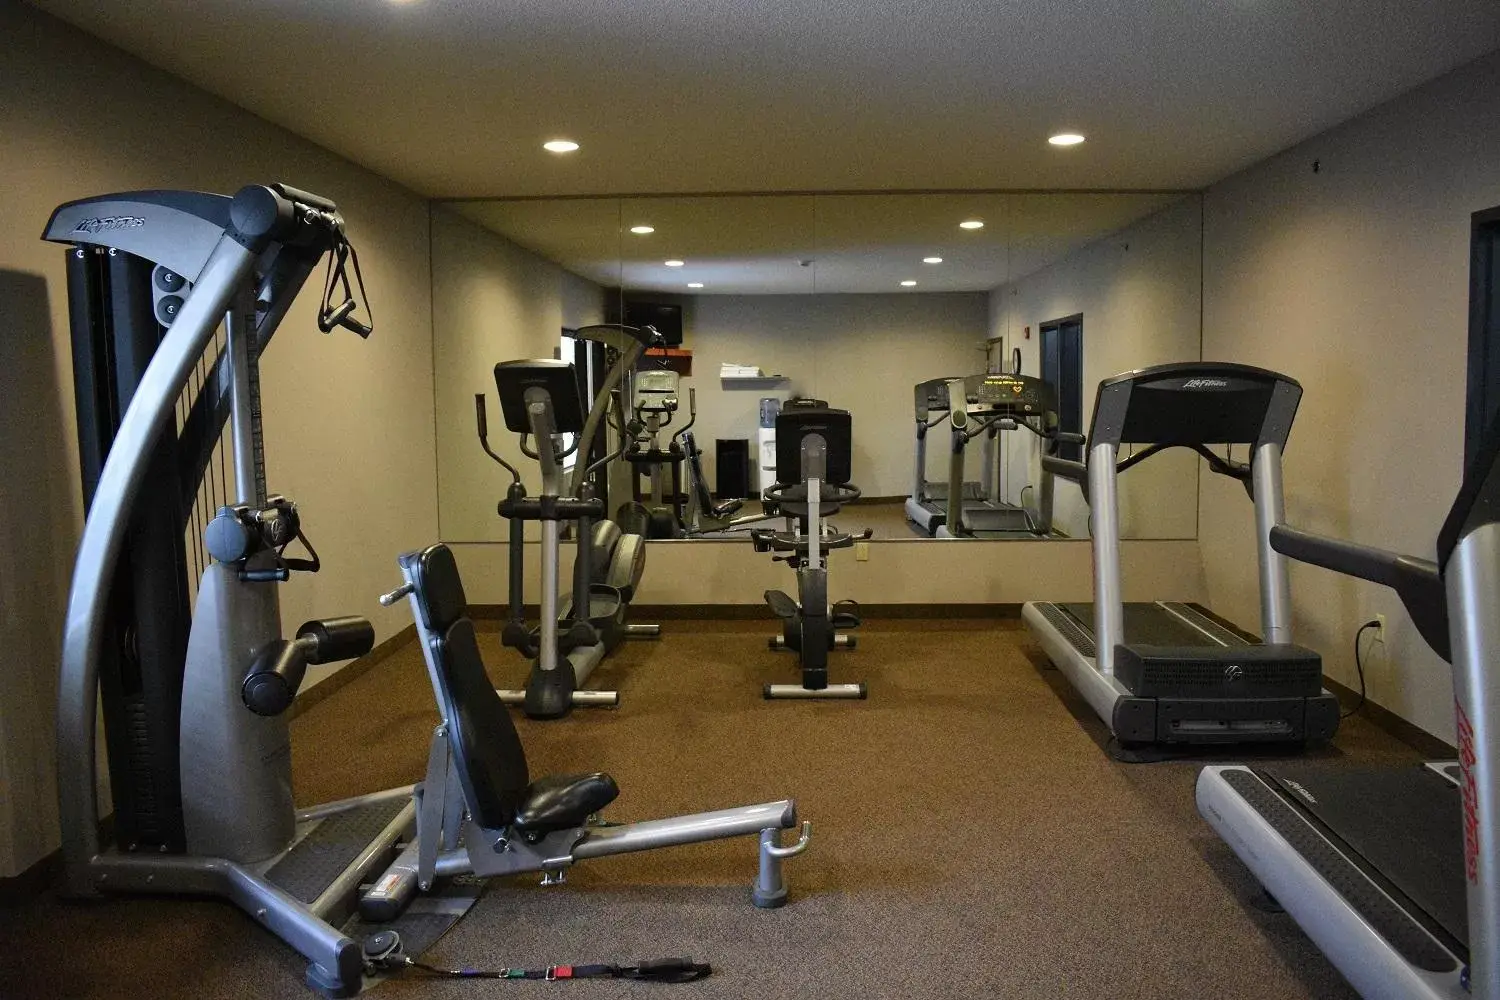 Fitness centre/facilities, Fitness Center/Facilities in Country Inn & Suites by Radisson, Northwood, IA